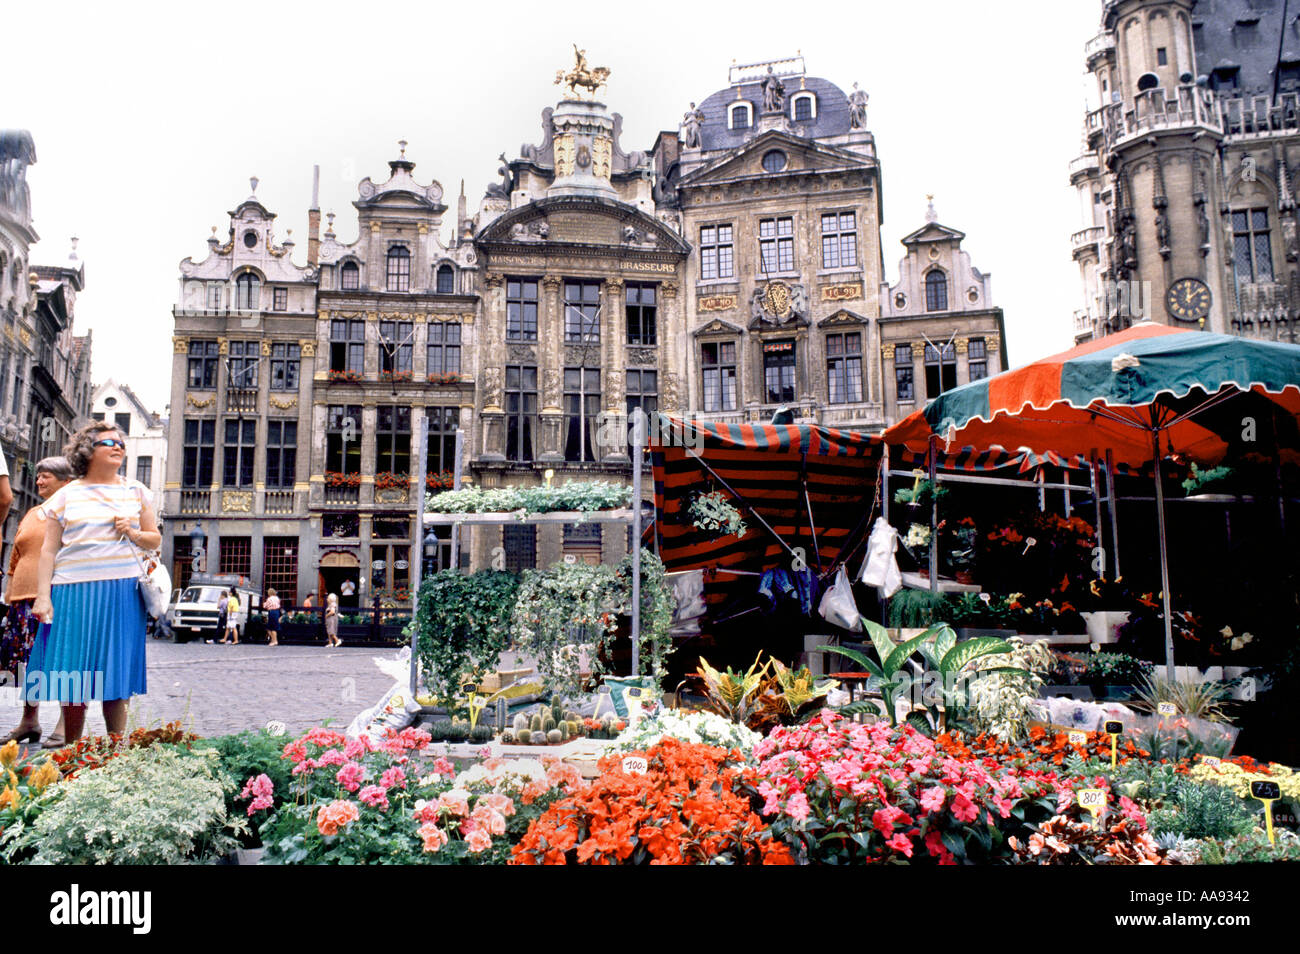 BRUSSELS BELGIUM Belgique People in "Flower Market" on "Grand Place" Historical Center of Old Town Stock Photo